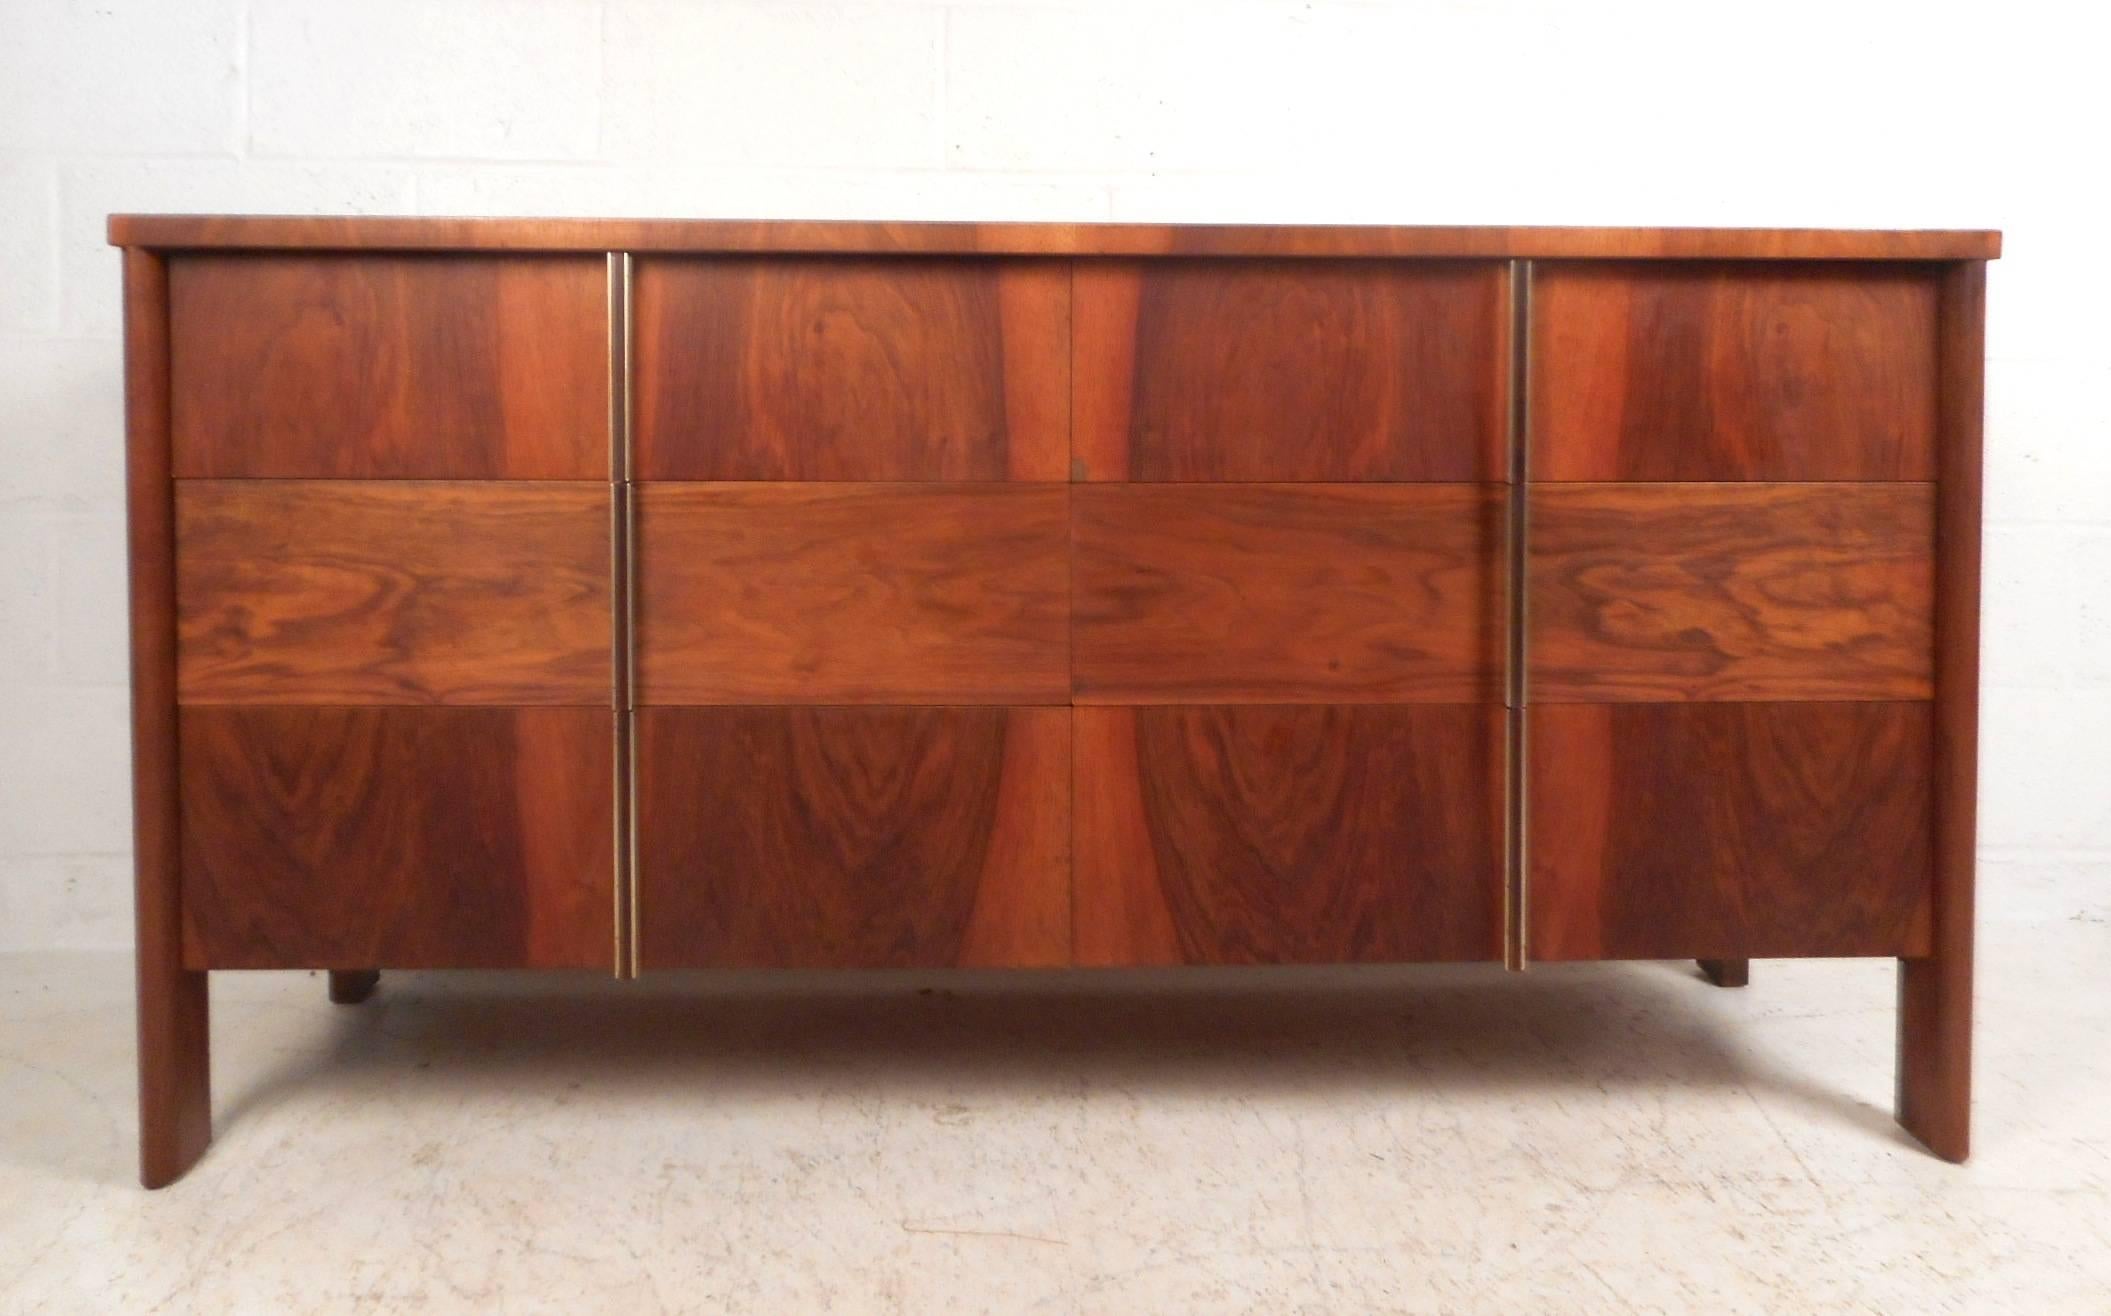 This stunning Mid-Century Modern dresser features six large drawers with aluminium brushed pulls. A compact design with wood grain running in different directions on the front. Unique rosewood drawer pulls encased in brushed aluminium and sturdy